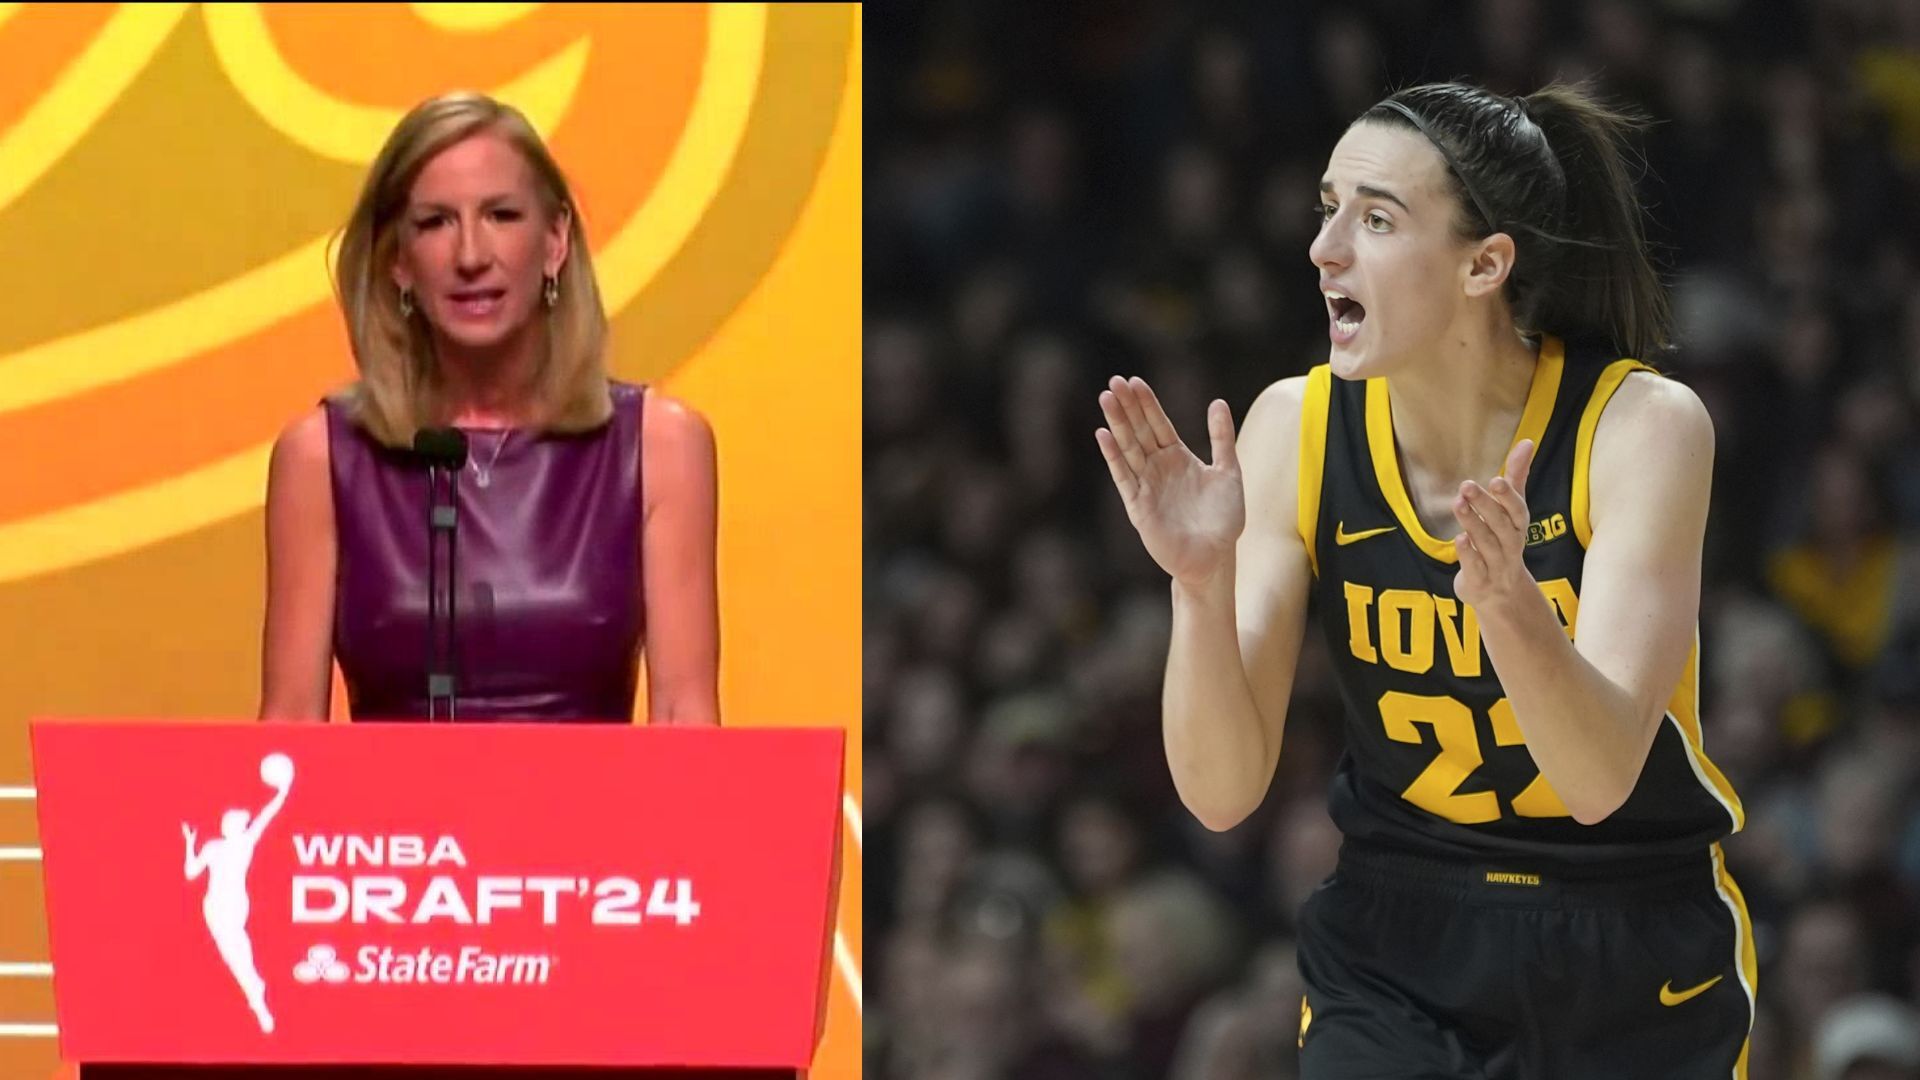 WNBA star Caitlin Clark is taking the sports world by storm